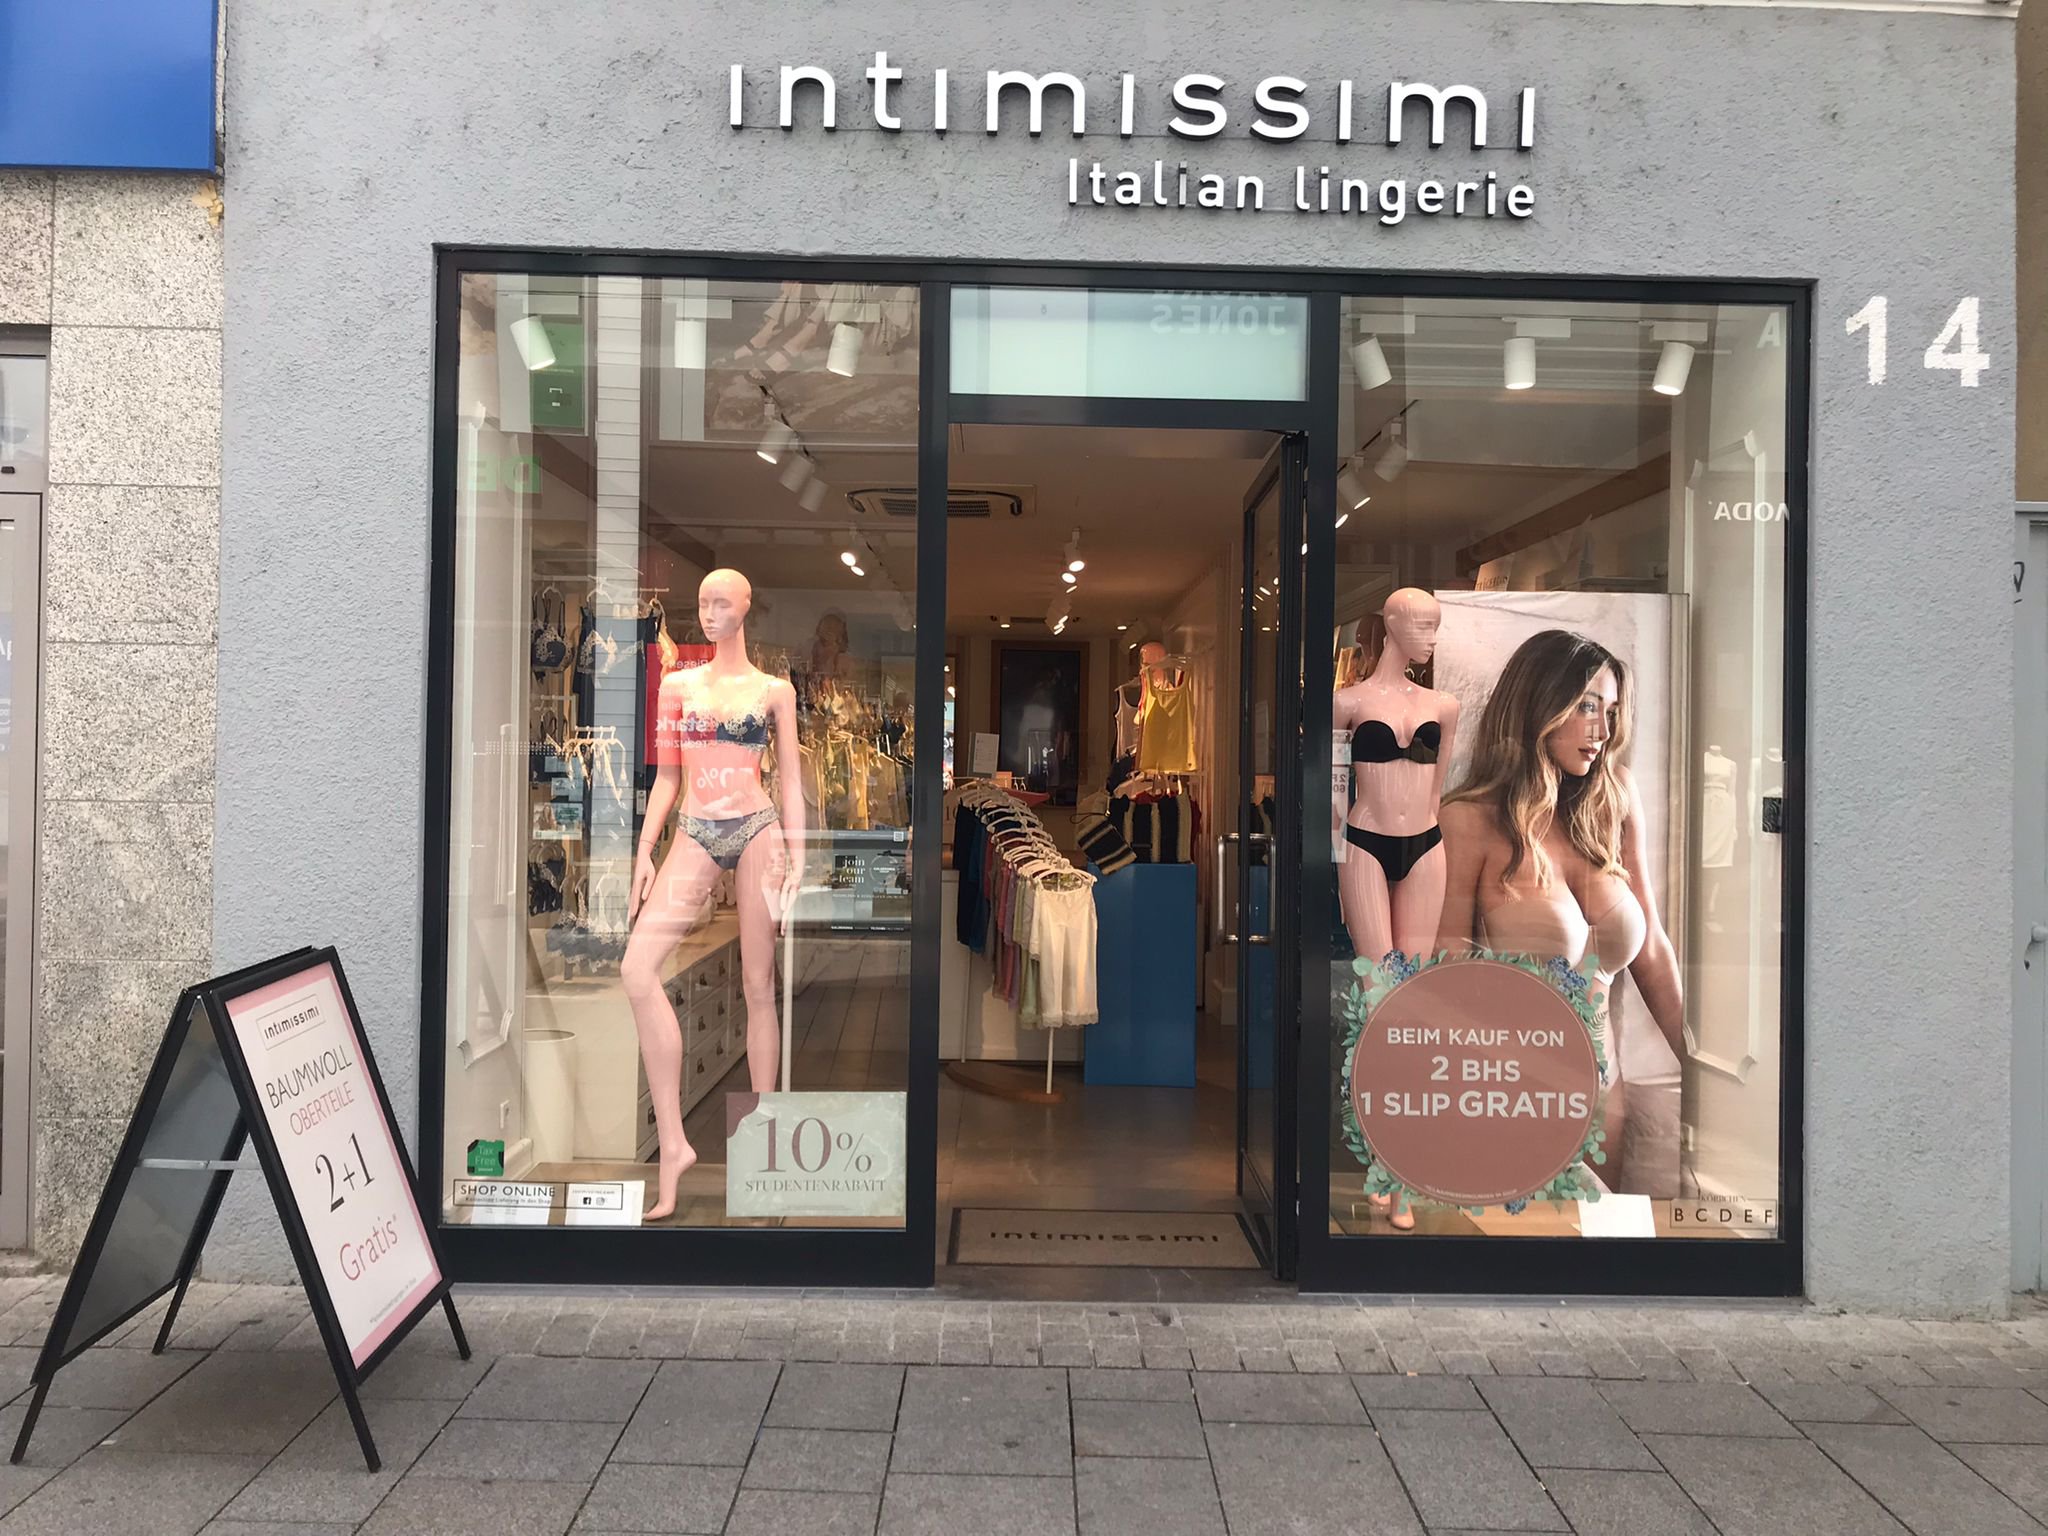 https://www.intimissimi.com/on/demandware.static/-/Library-Sites-IntimissimiContentLibrary/default/dw6049c986/storeImages/INT_IY44_001.jpg